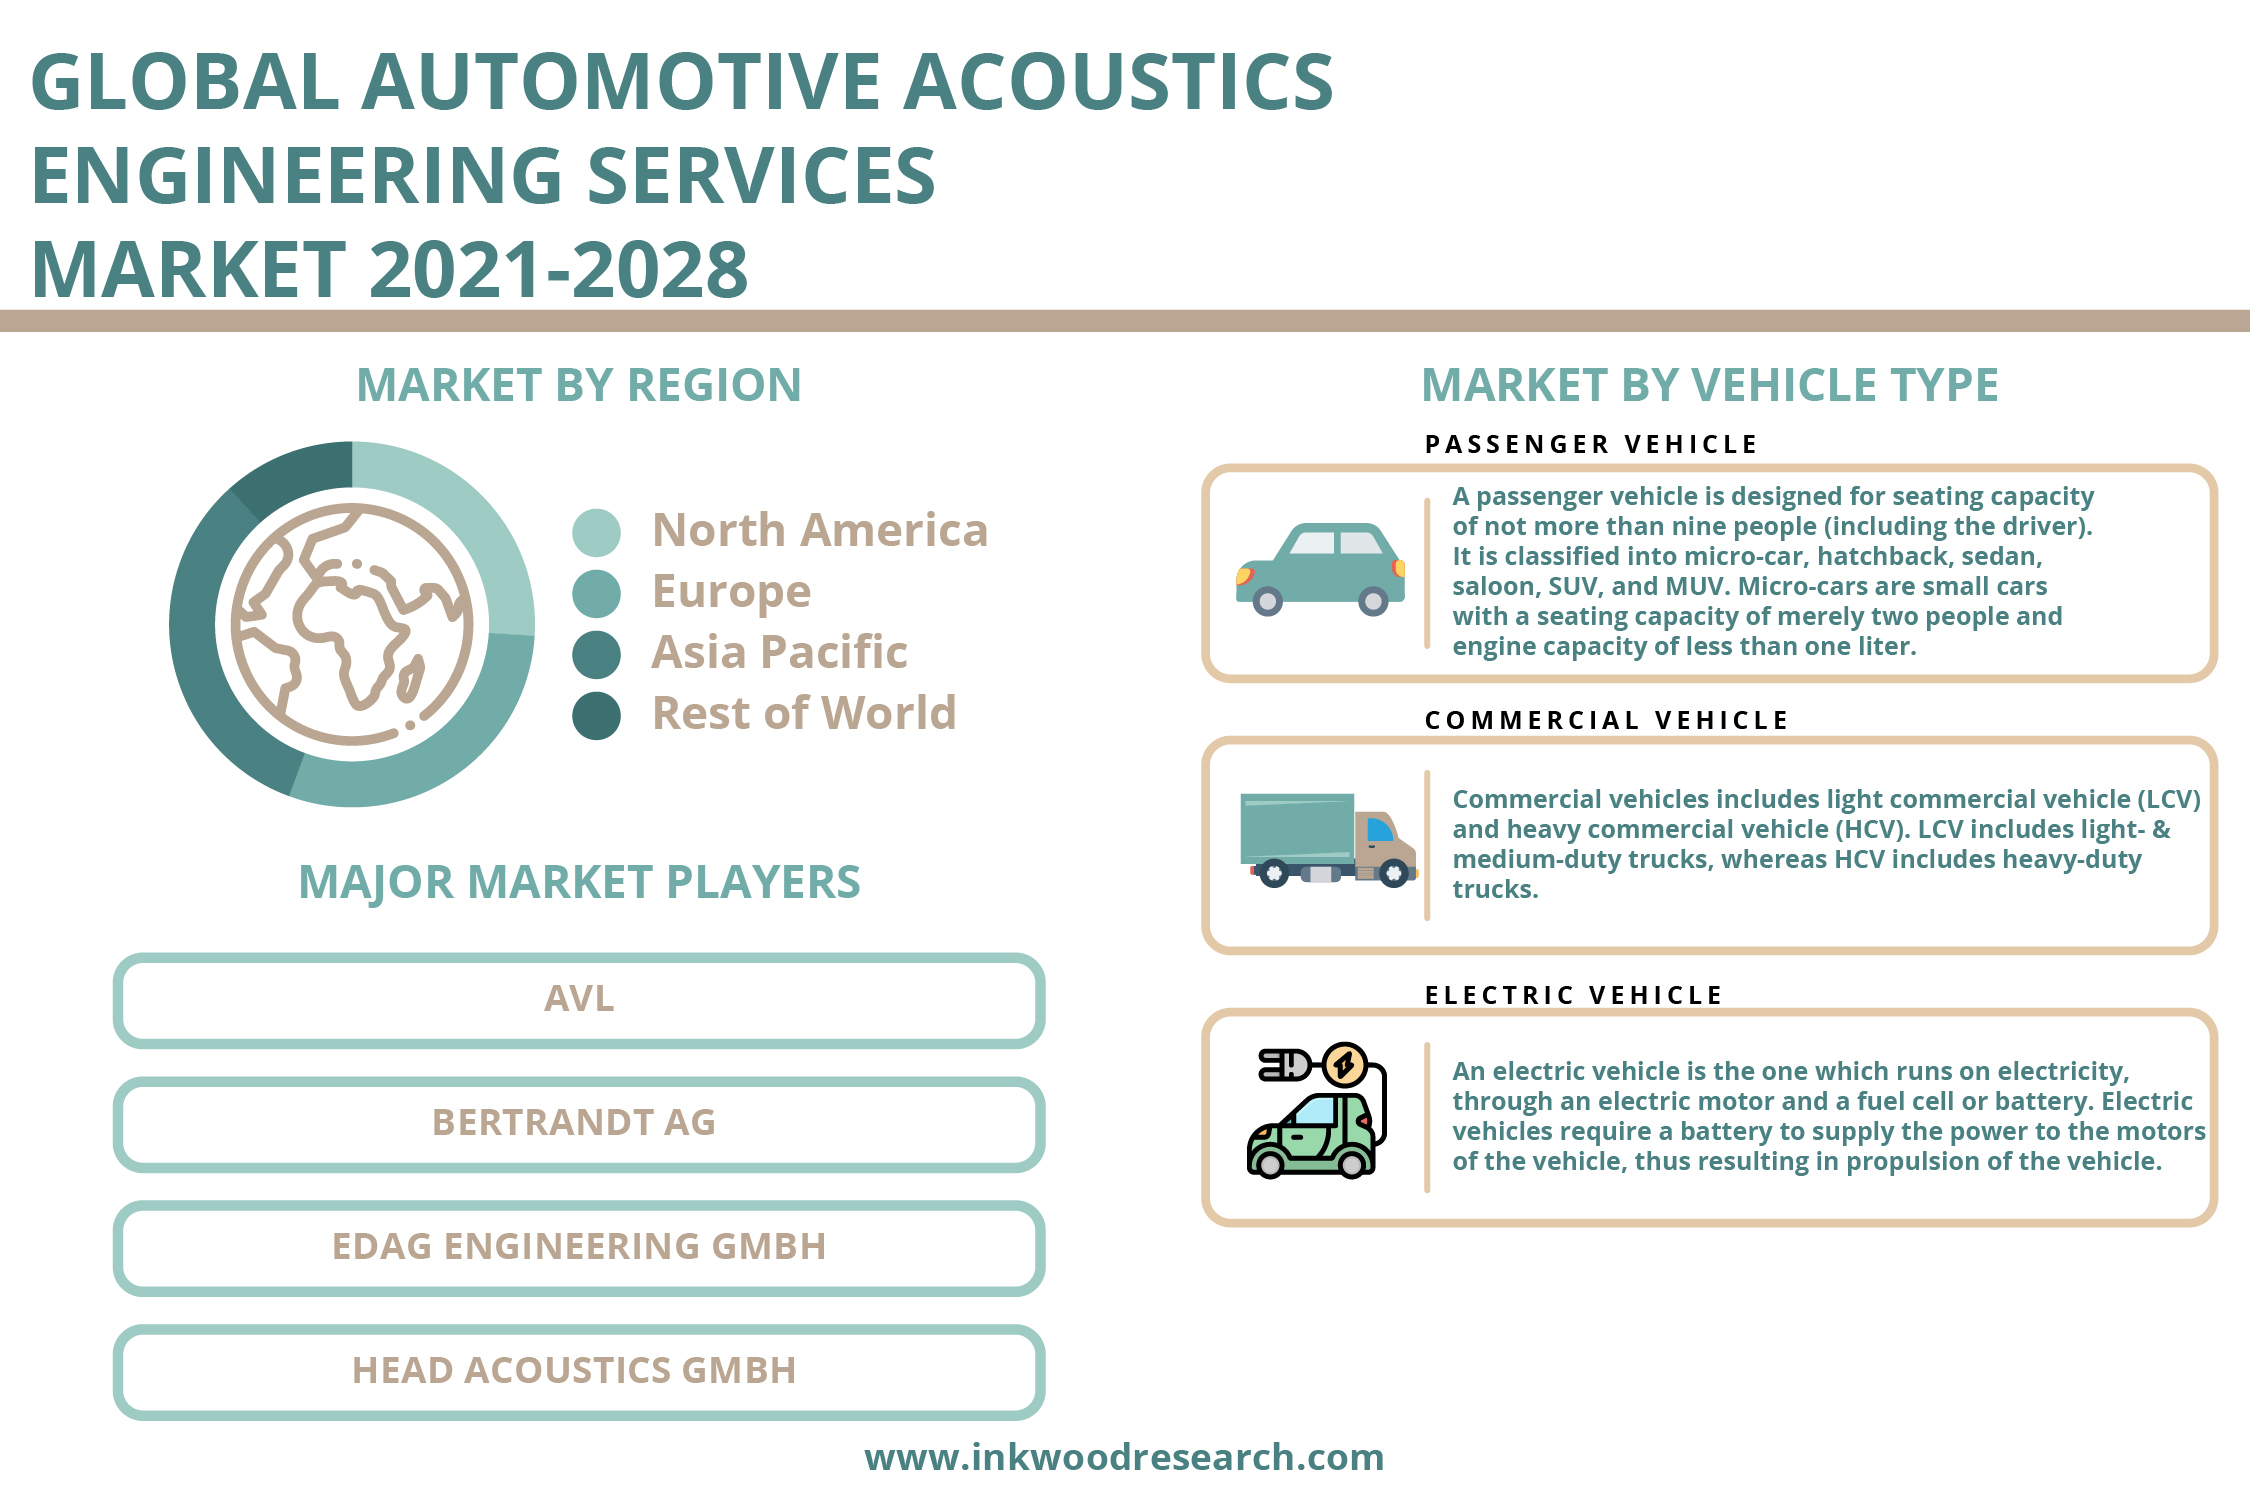 Demand for Premium Interiors to propel the Global Automotive Acoustic Engineering Services Market Growth